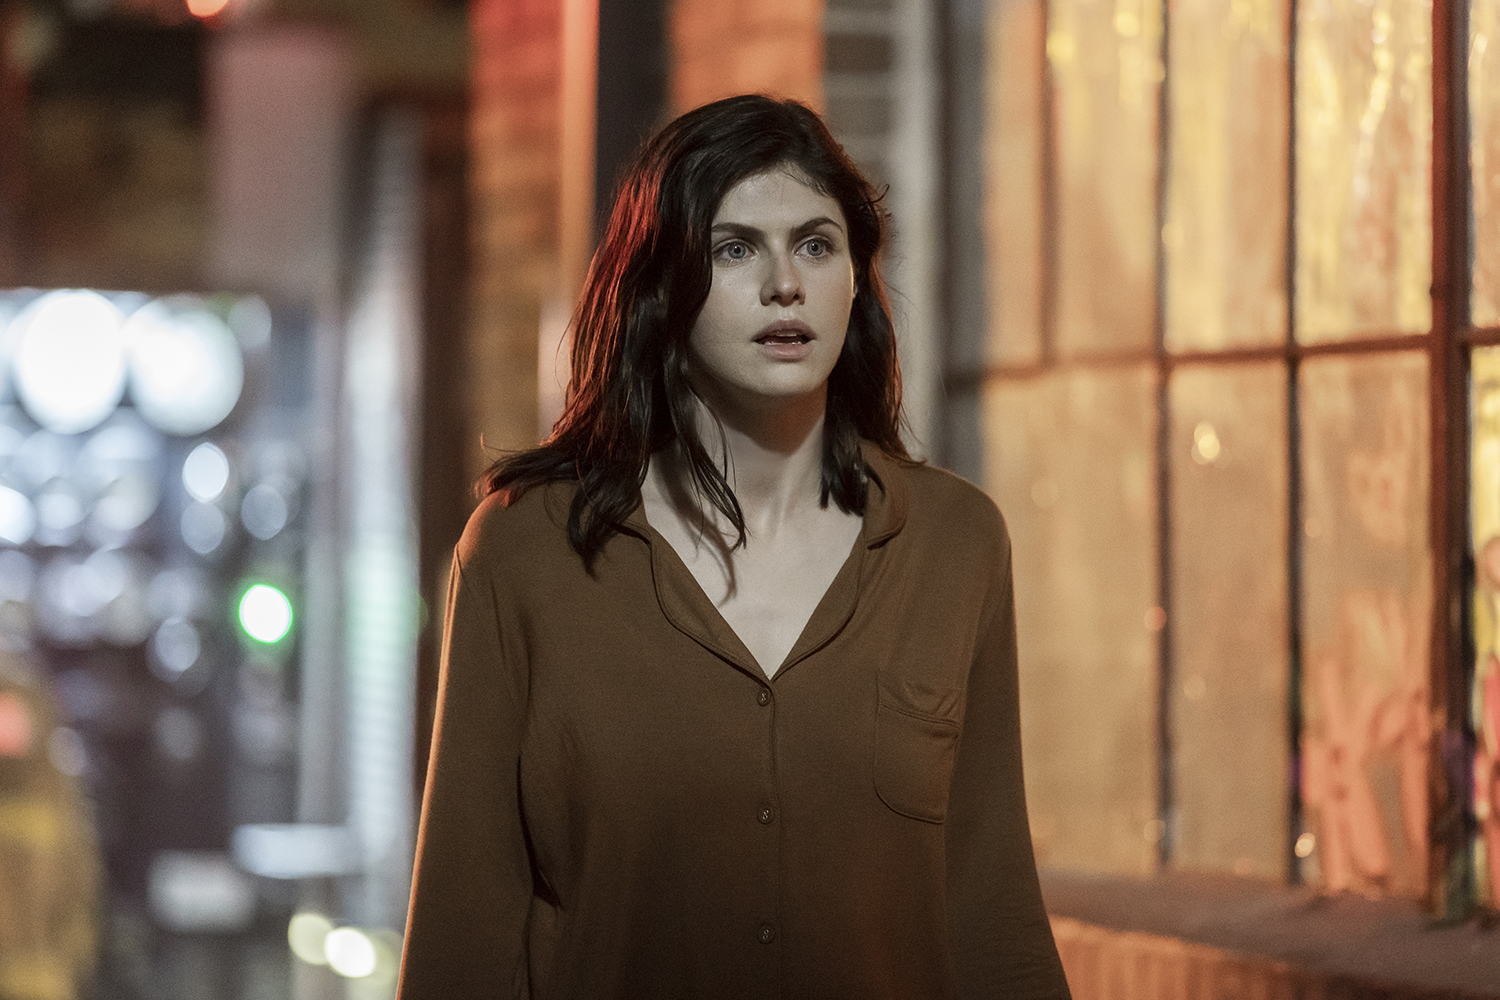 Alexandra Daddario as Dr. Rowan Fielding with a shocked expression on her face in Mayfair Witches